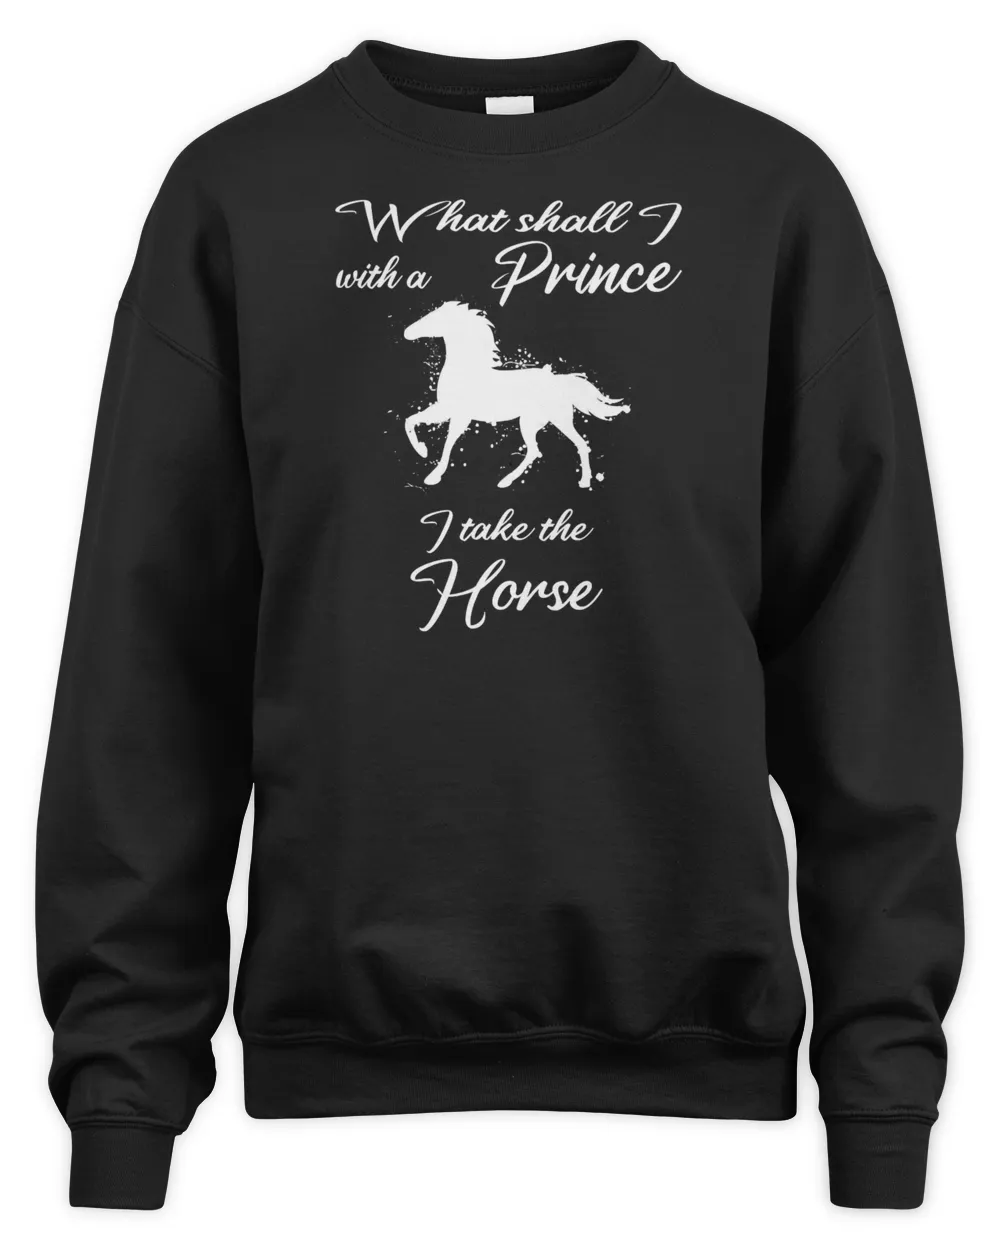 I&39;ll take the horse, rider saying prince or horse funny T-Shirt